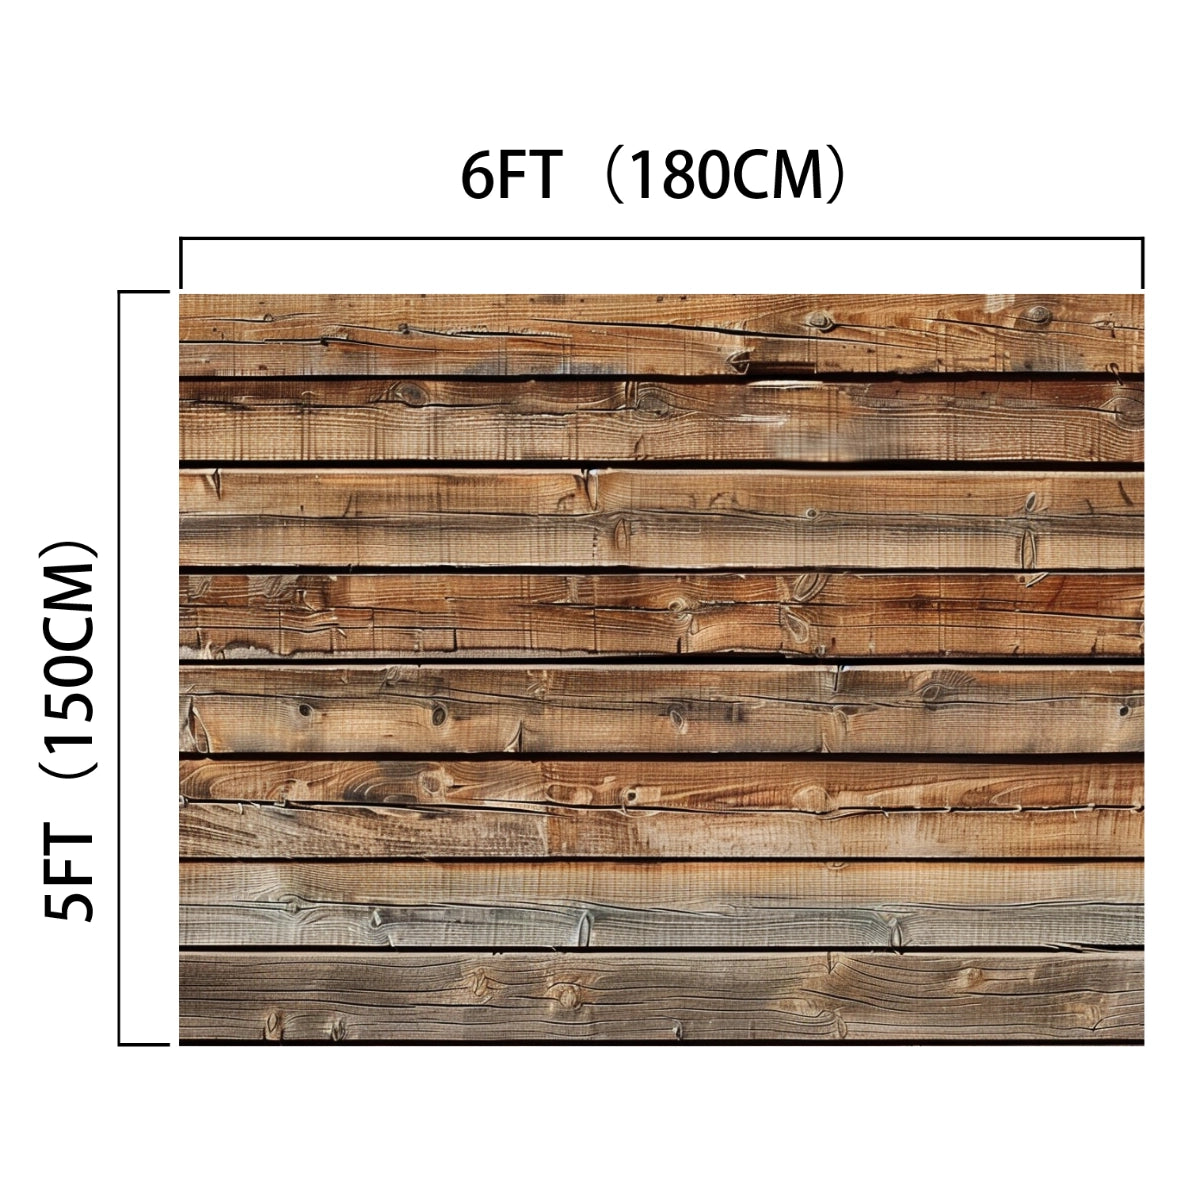 A 7x5ft Wood Backdrops for Photography Worn Wooden Boards Background Brown Photo Wall Photo Studio by ideasbackdrop is shown, ideal as a wood wall backdrop. The dimensions 180 cm and 150 cm are labeled at the top and left sides respectively.